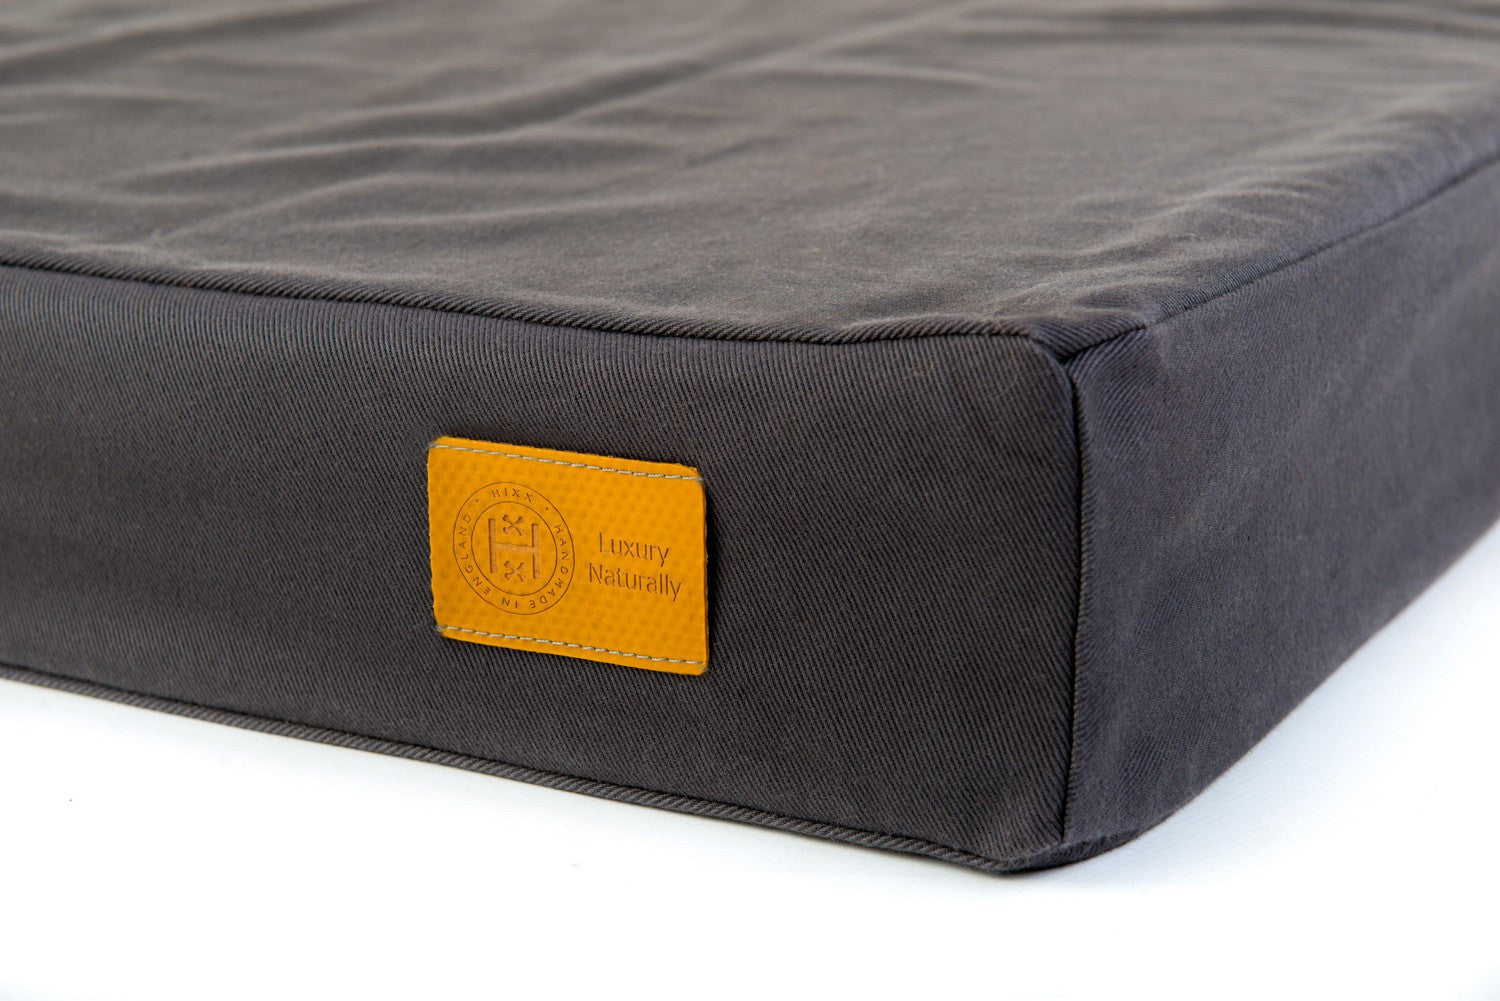 Float orthopaedic waterbed in charcoal cotton for dogs made in Britain from organic materials. 